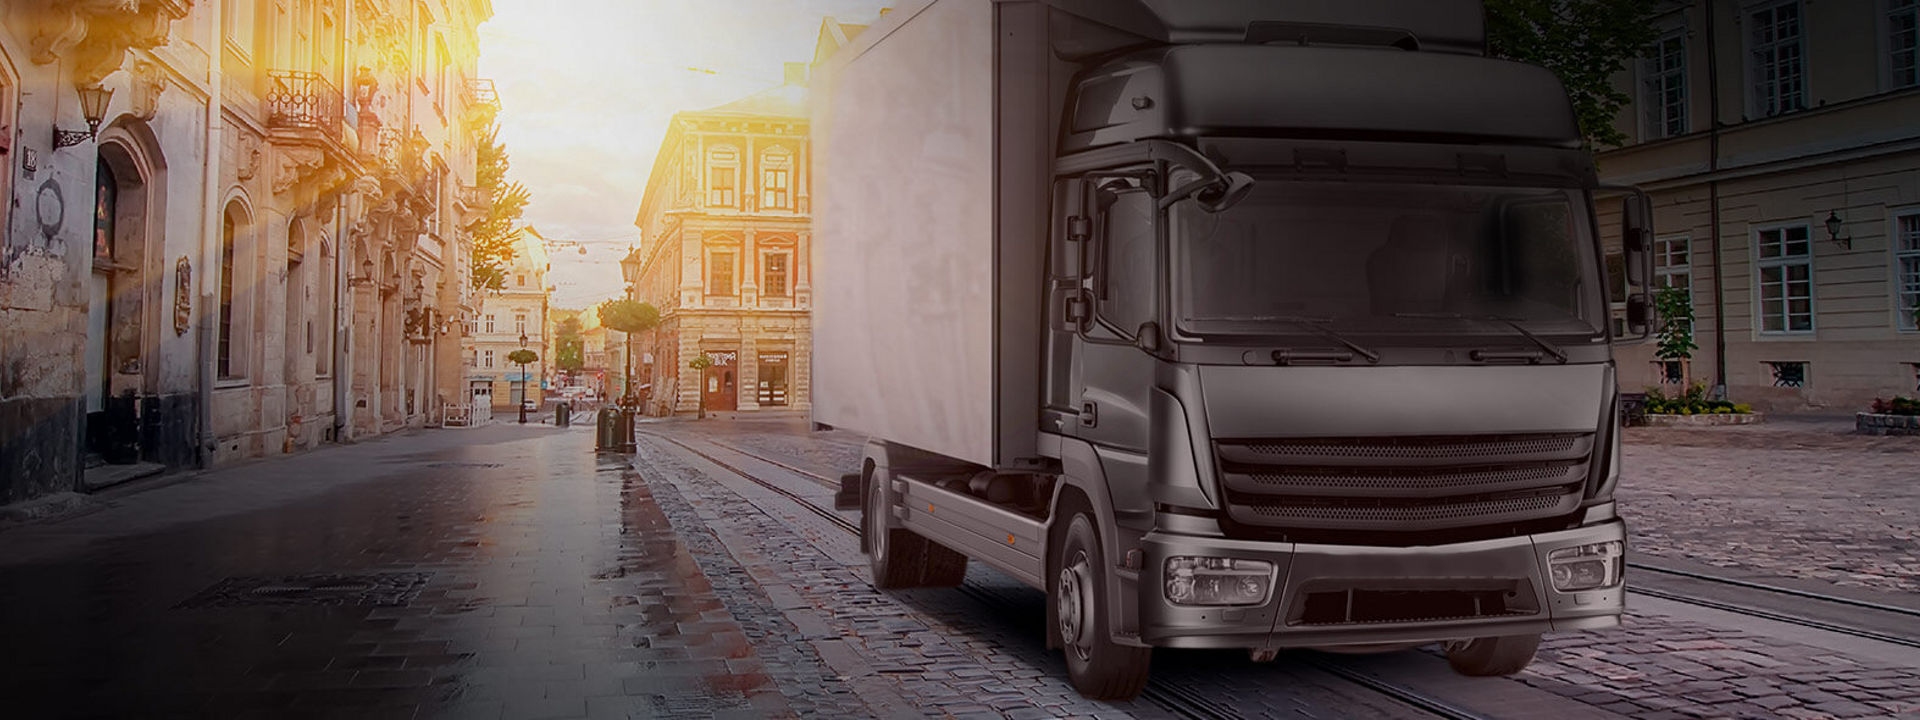 This image is a truck using Bridgestone light & medium truck tyres to deliver goods in the middle of a city.